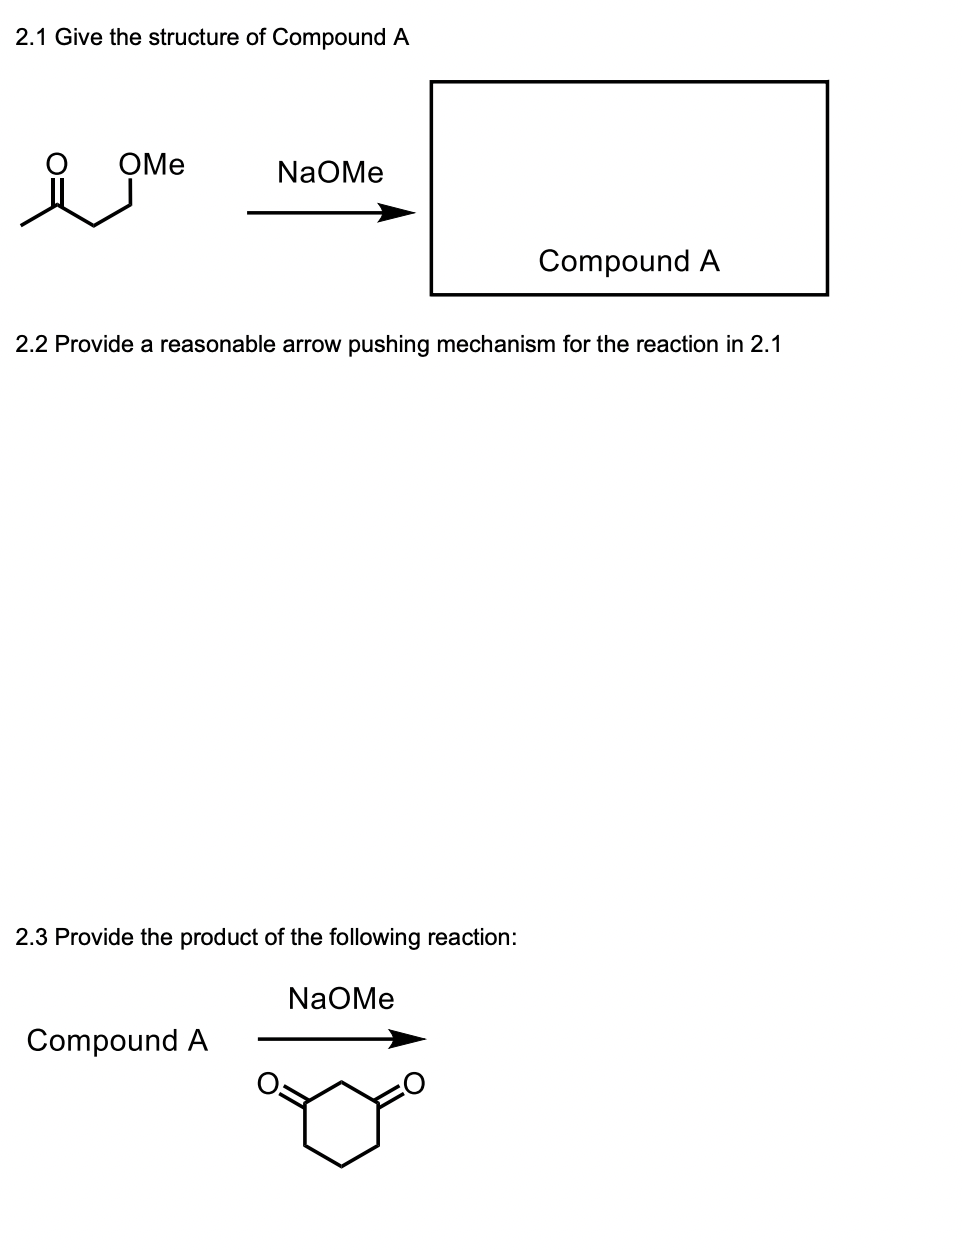 2.1 Give the structure of Compound A
OMe
NaOMe
2.2 Provide a reasonable arrow pushing mechanism for the reaction in 2.1
2.3 Provide the product of the following reaction:
Compound A
Compound A
NaOMe